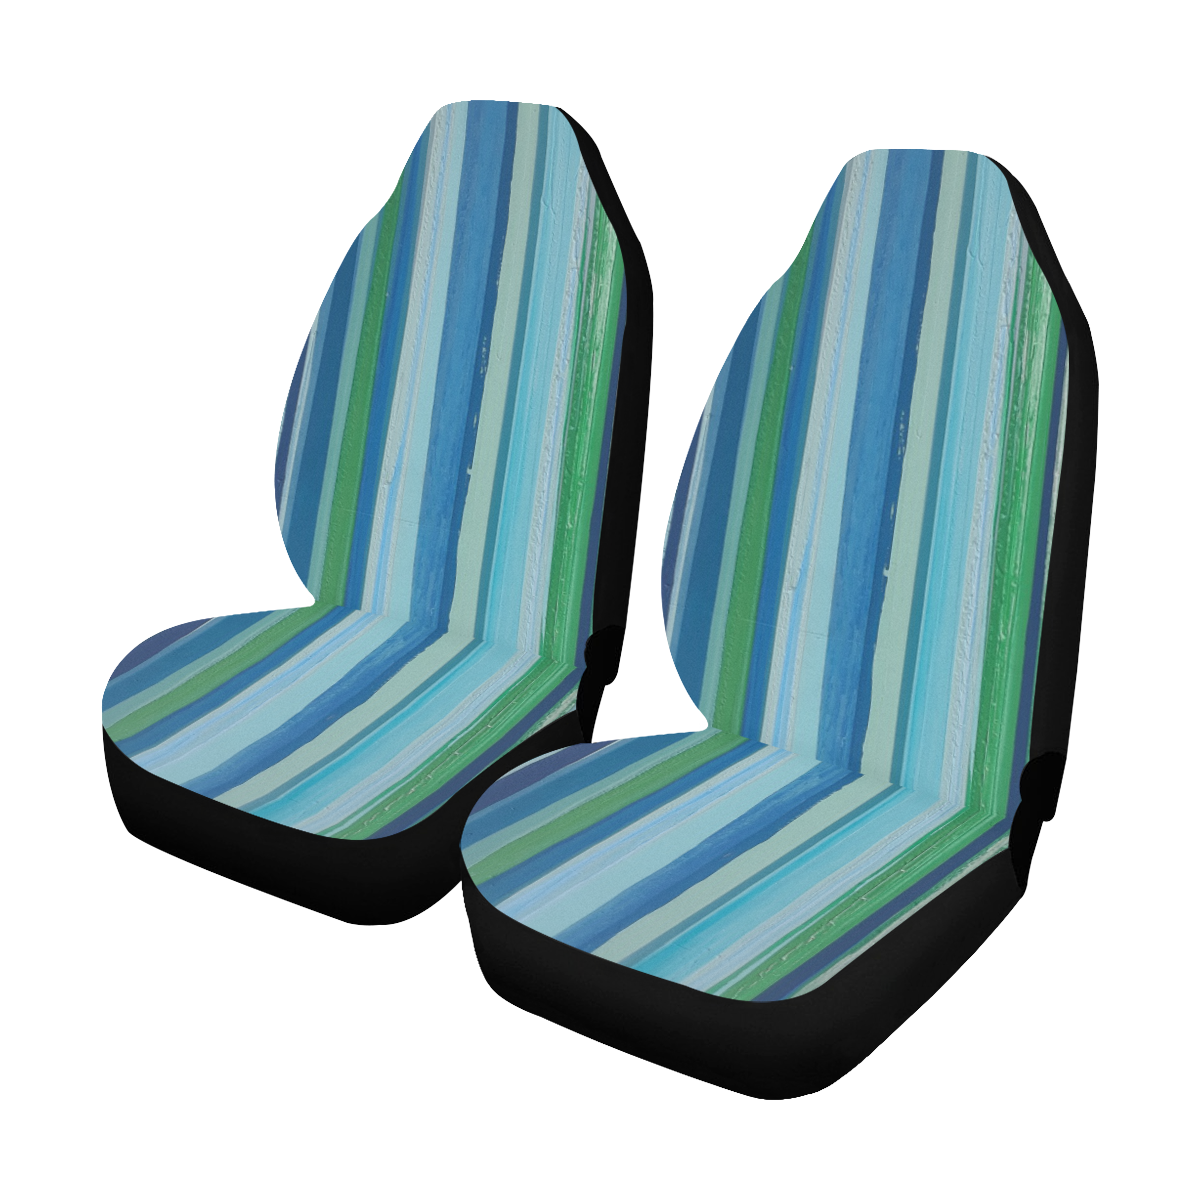 painted stripe Car Seat Covers (Set of 2)